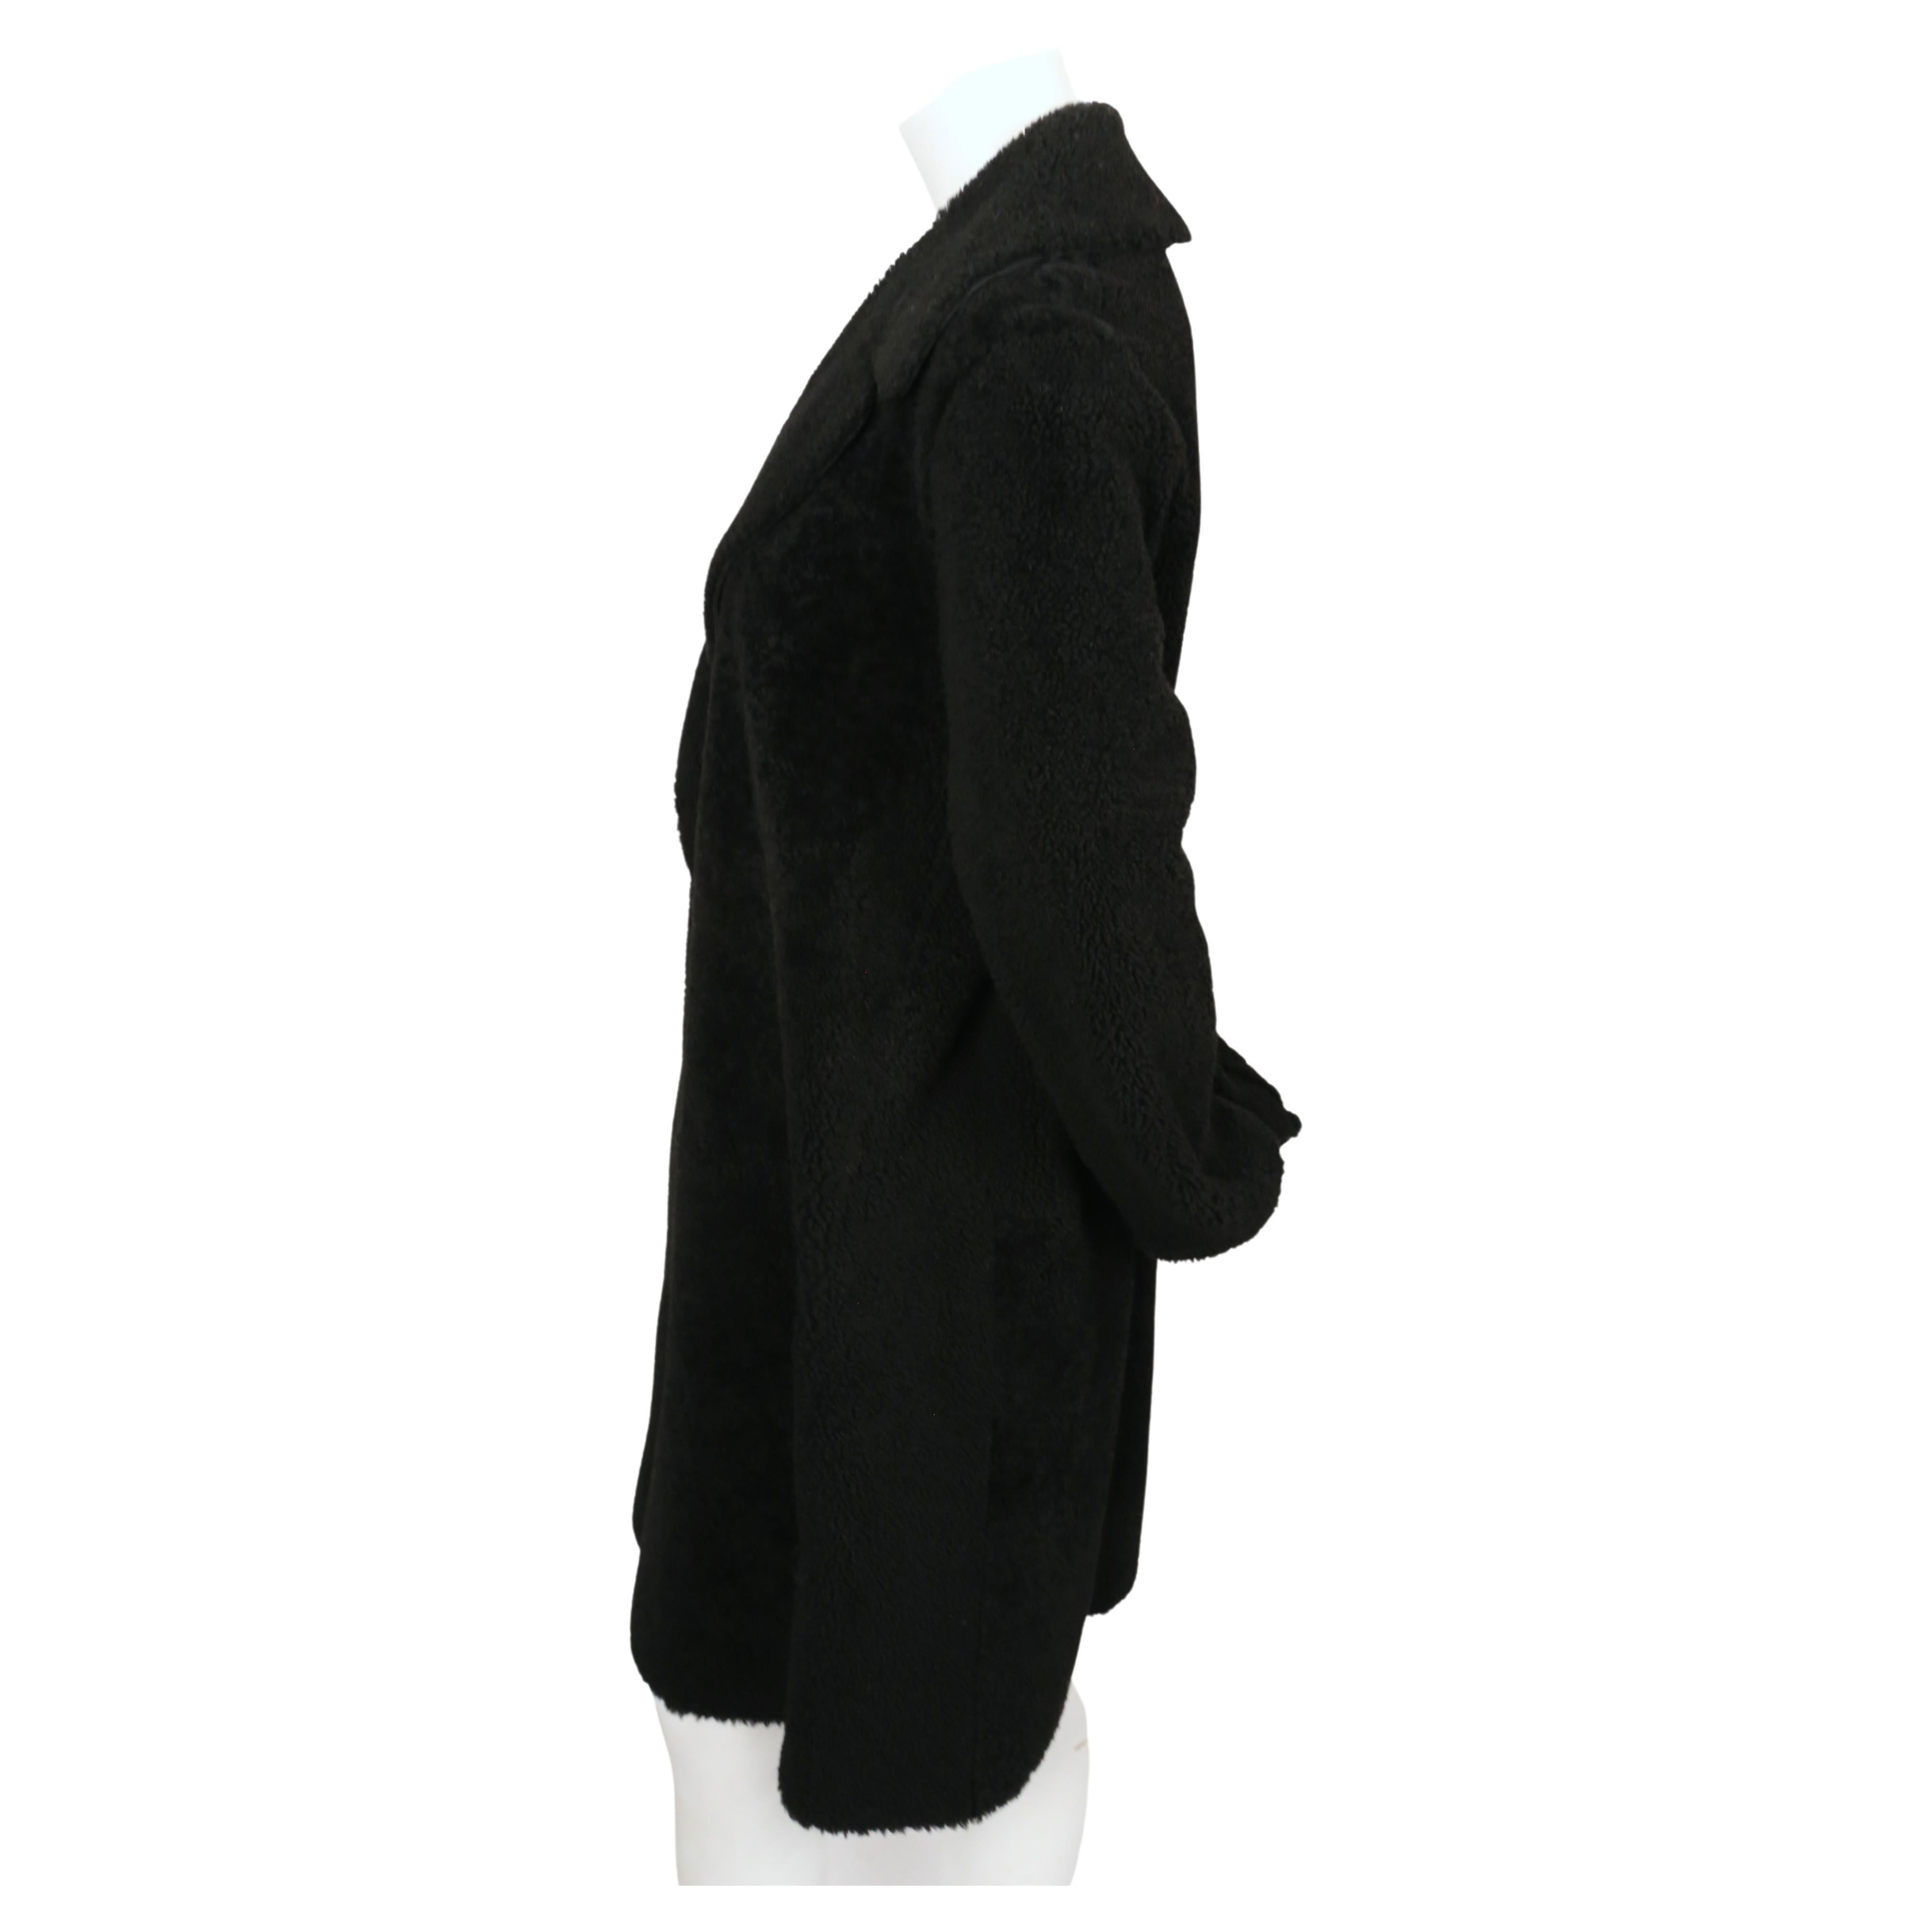 CELINE by PHOEBE PHILO black shearling coat In Good Condition For Sale In San Fransisco, CA